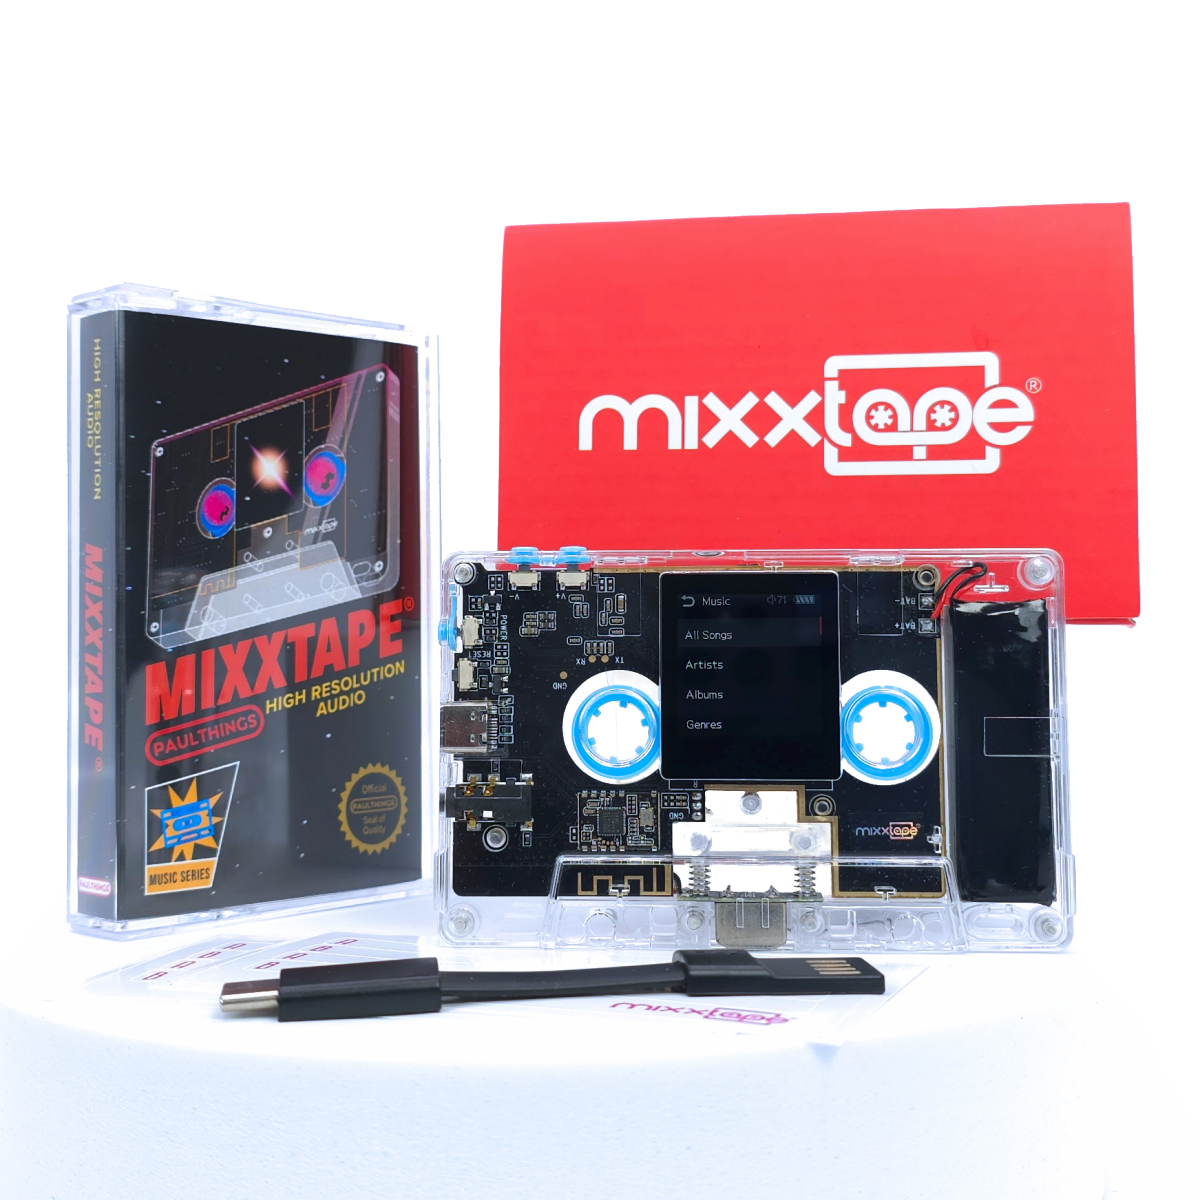 Mixxtape: A kickass music player now available on a flash sale for $45. Limited time!